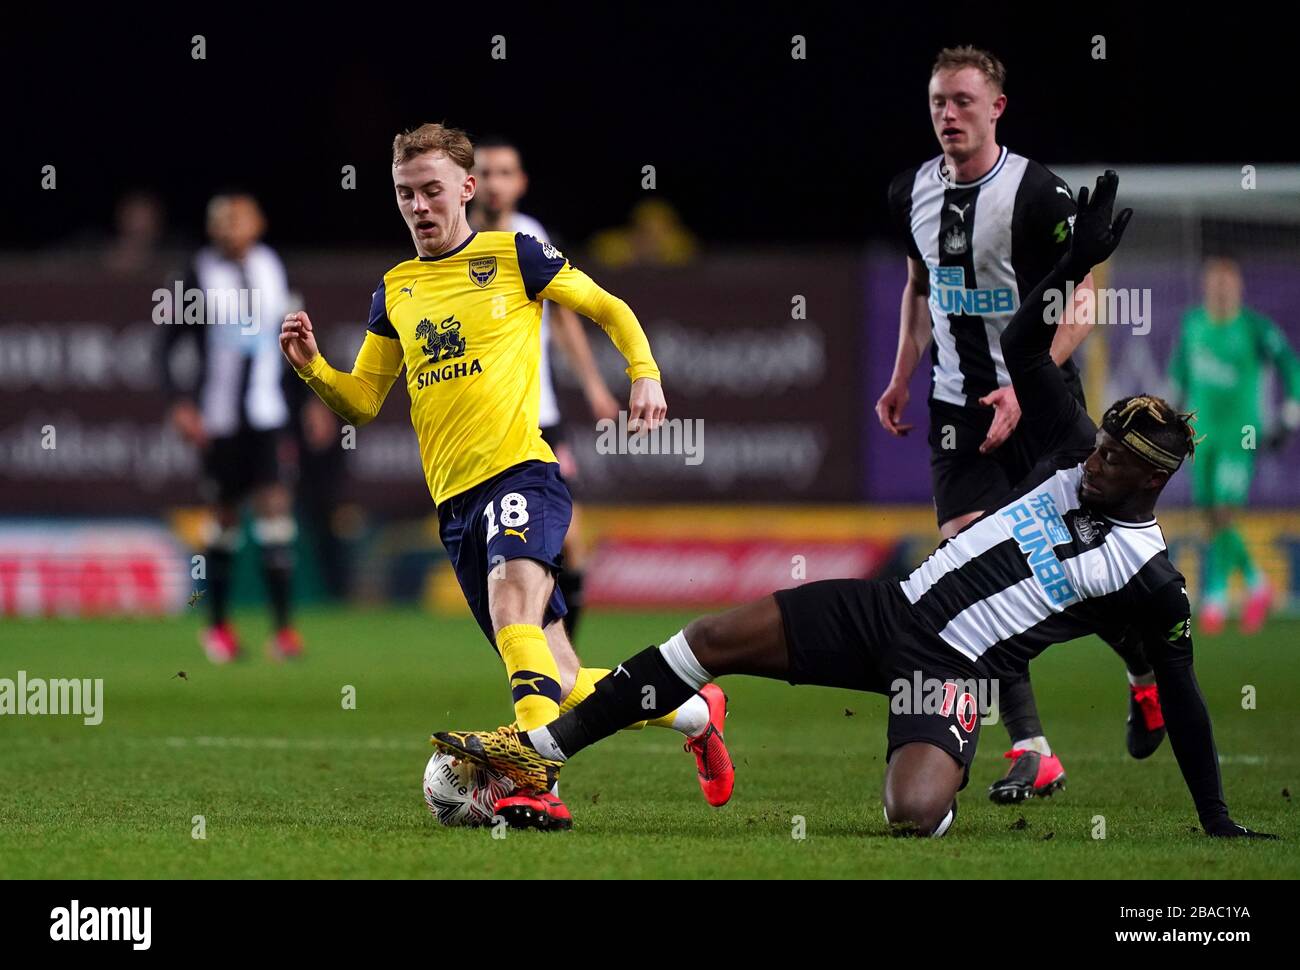 Oxford United's Mark Sykes (right) and Newcastle United's Allan Saint-Maximin battle for the ball Stock Photo